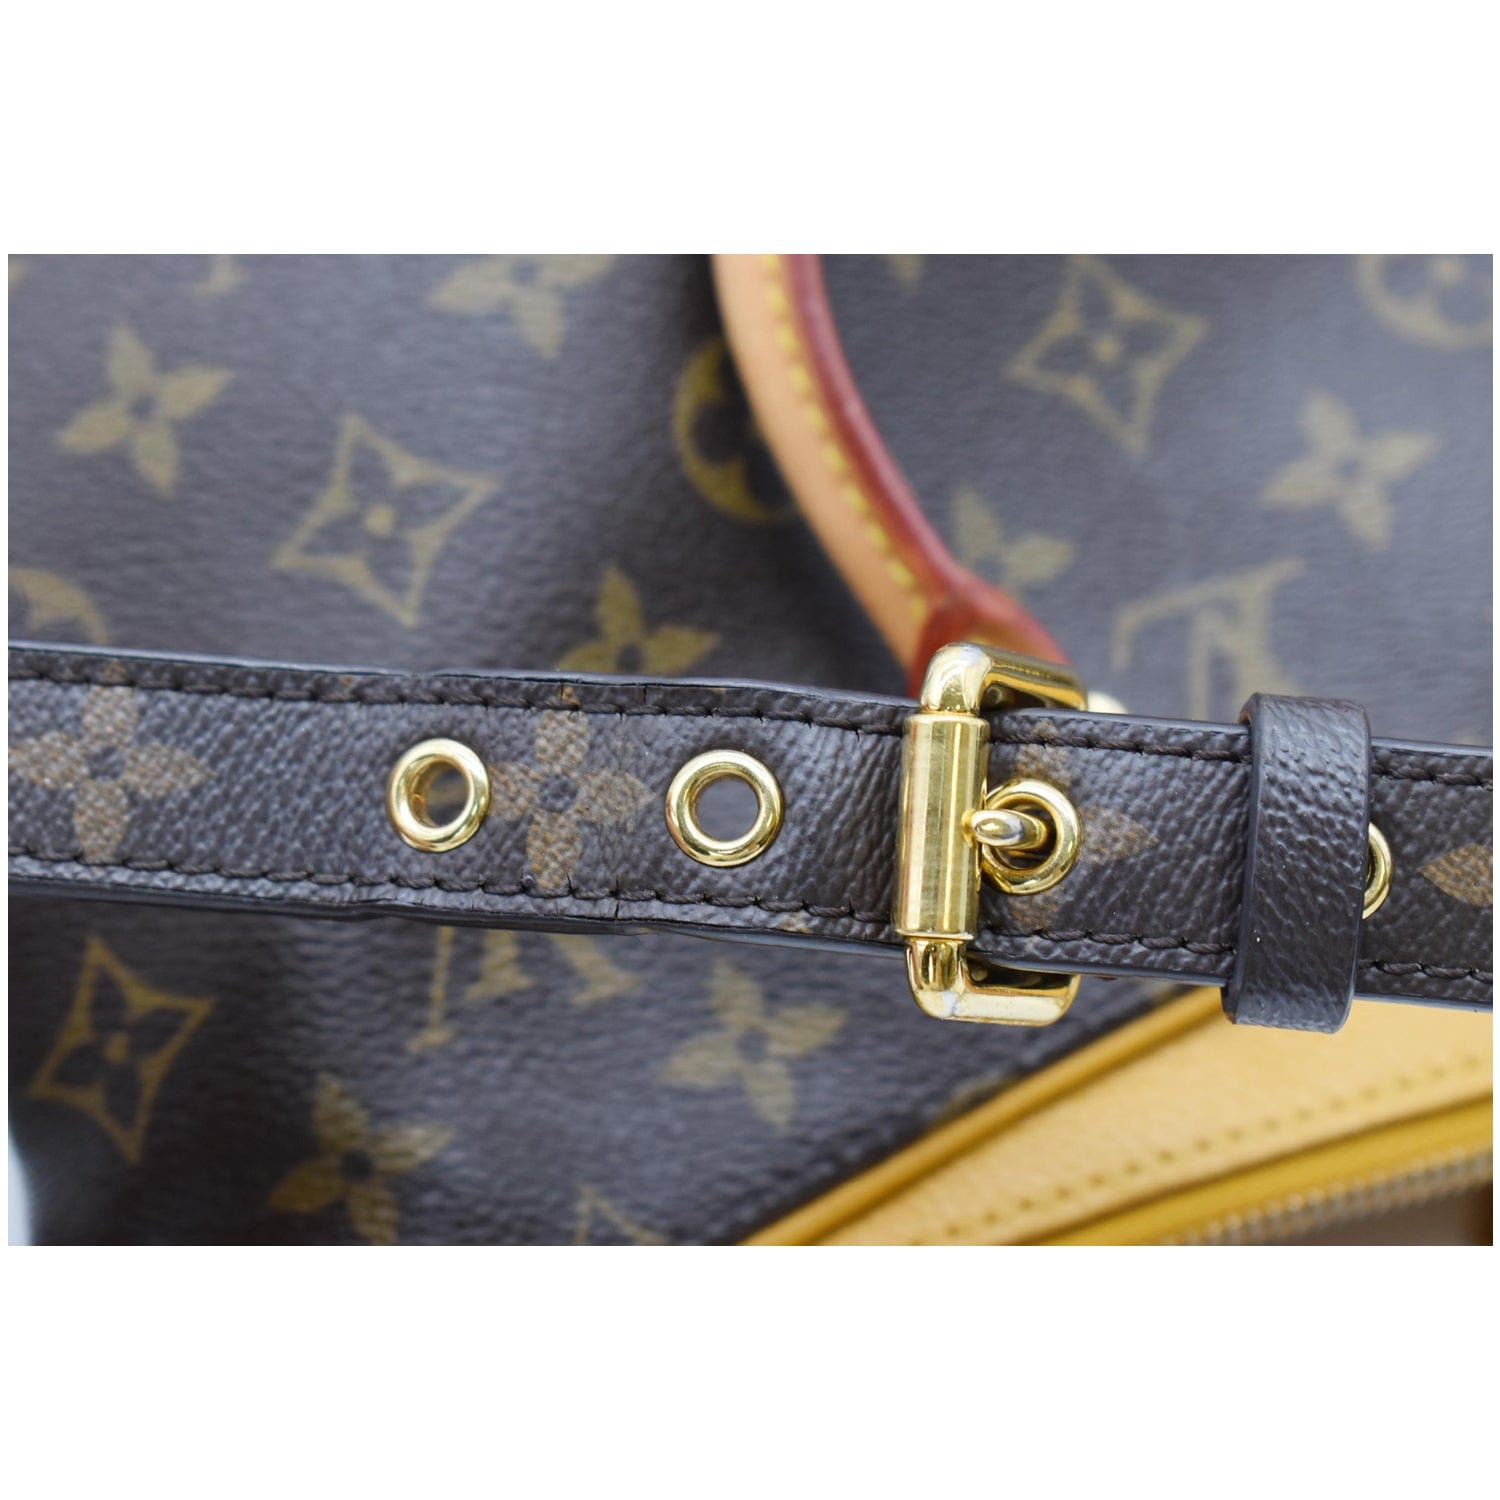 LOUIS VUITTON Brown Monogram Coated Canvas and Vachetta Leather Pallas MM  at 1stDibs